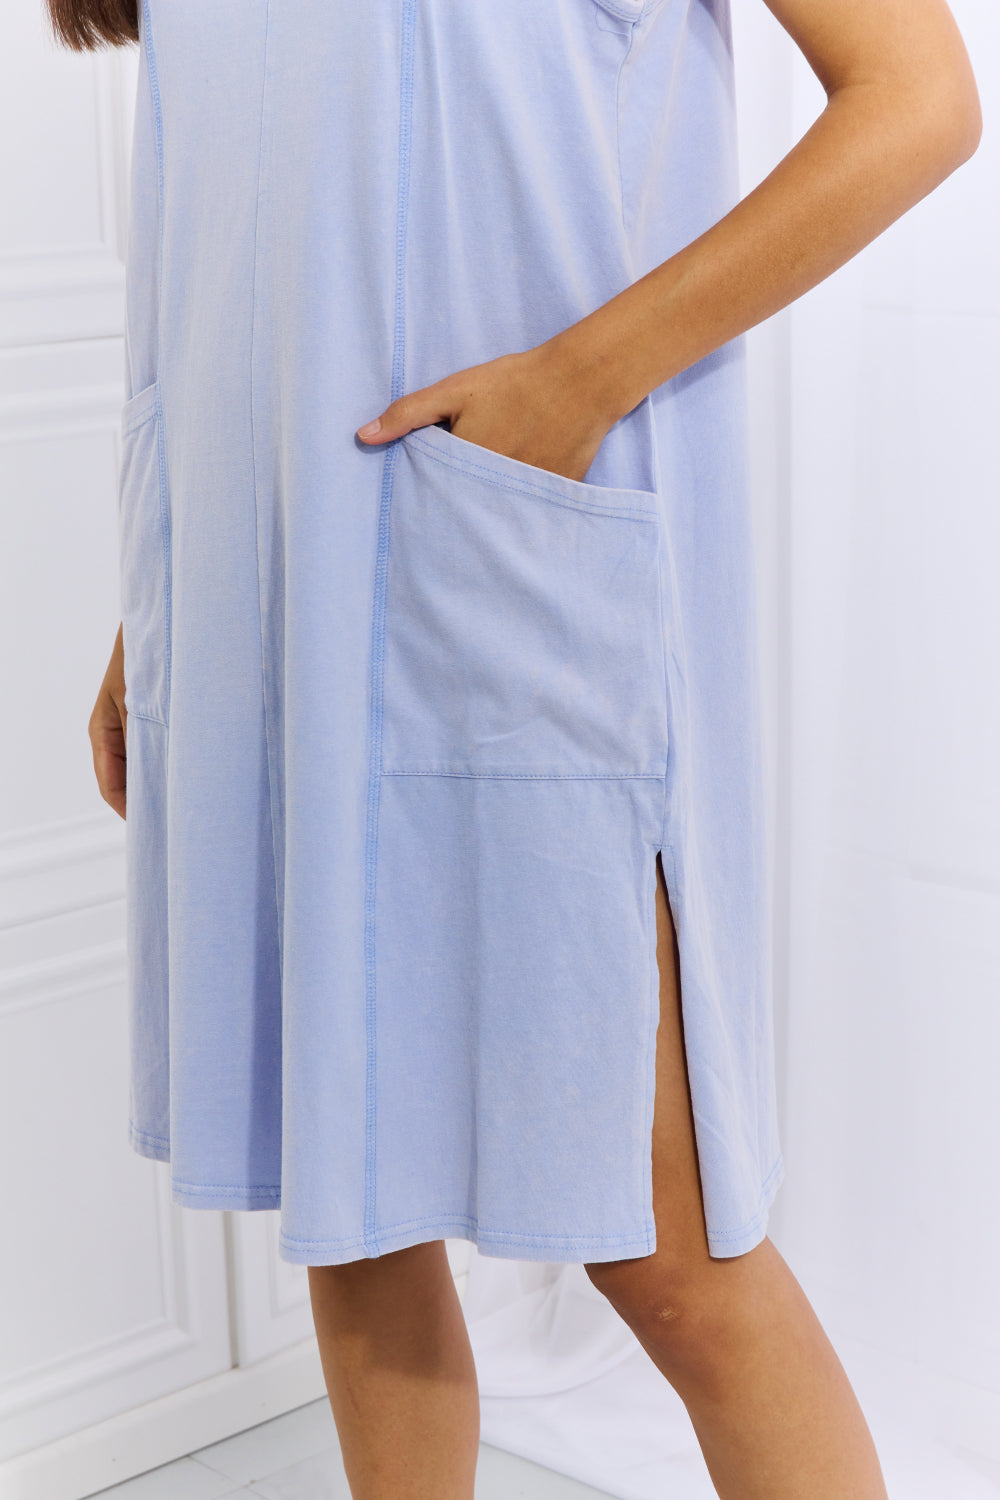 HEYSON Look Good, Feel Good Full Size Washed Sleeveless Casual Dress in Periwinkle